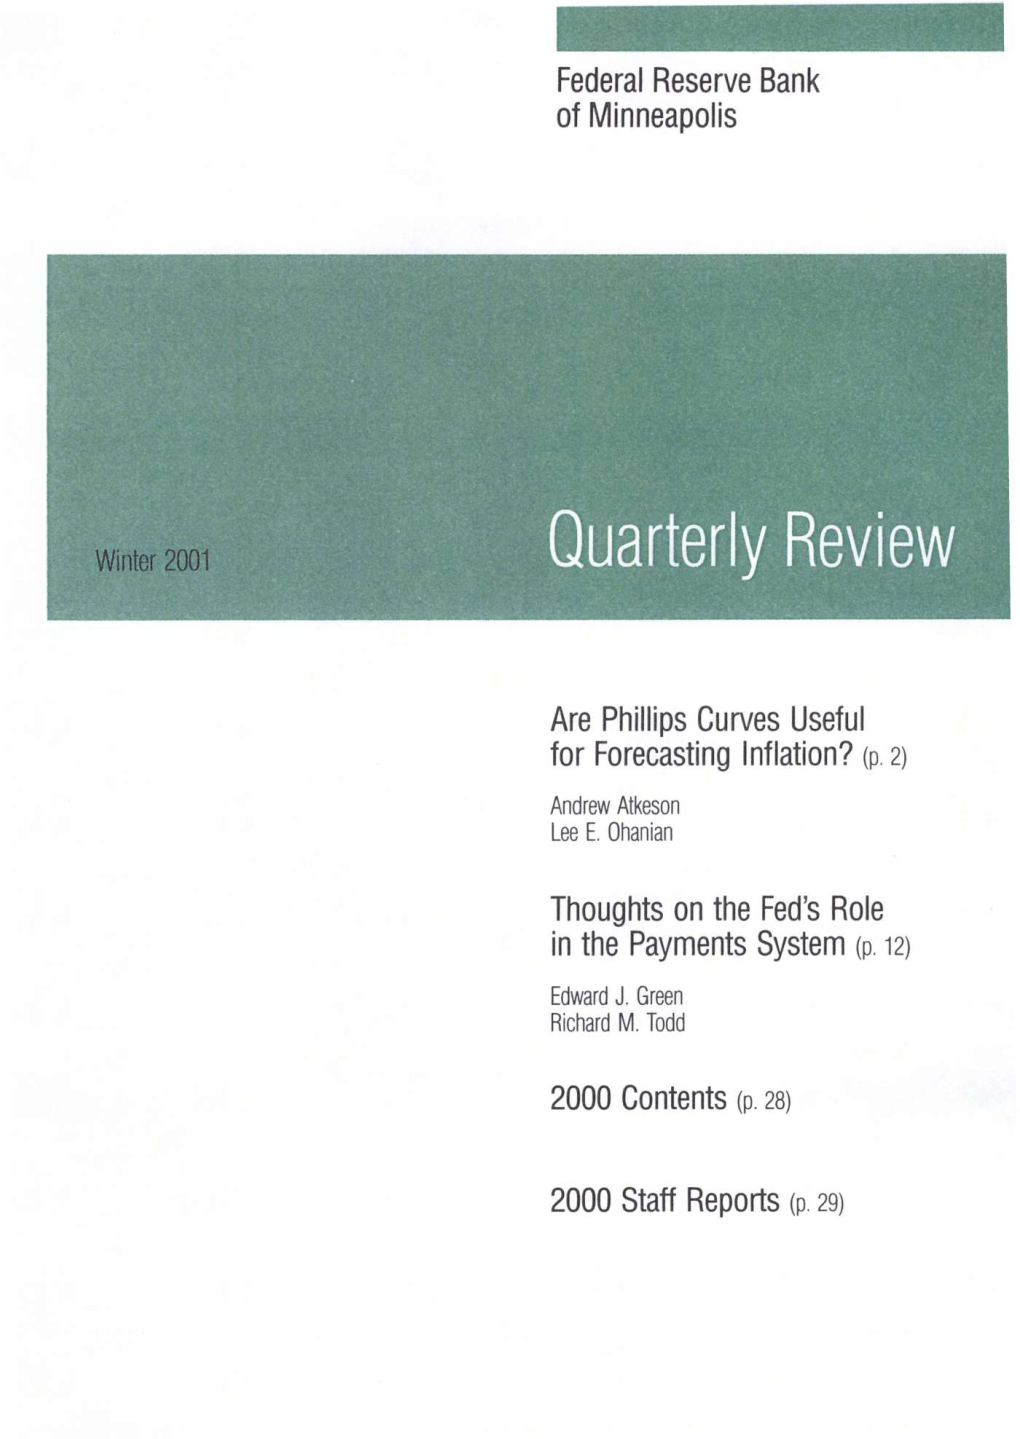 The Quarterly Review Is Published by the Research Department of The